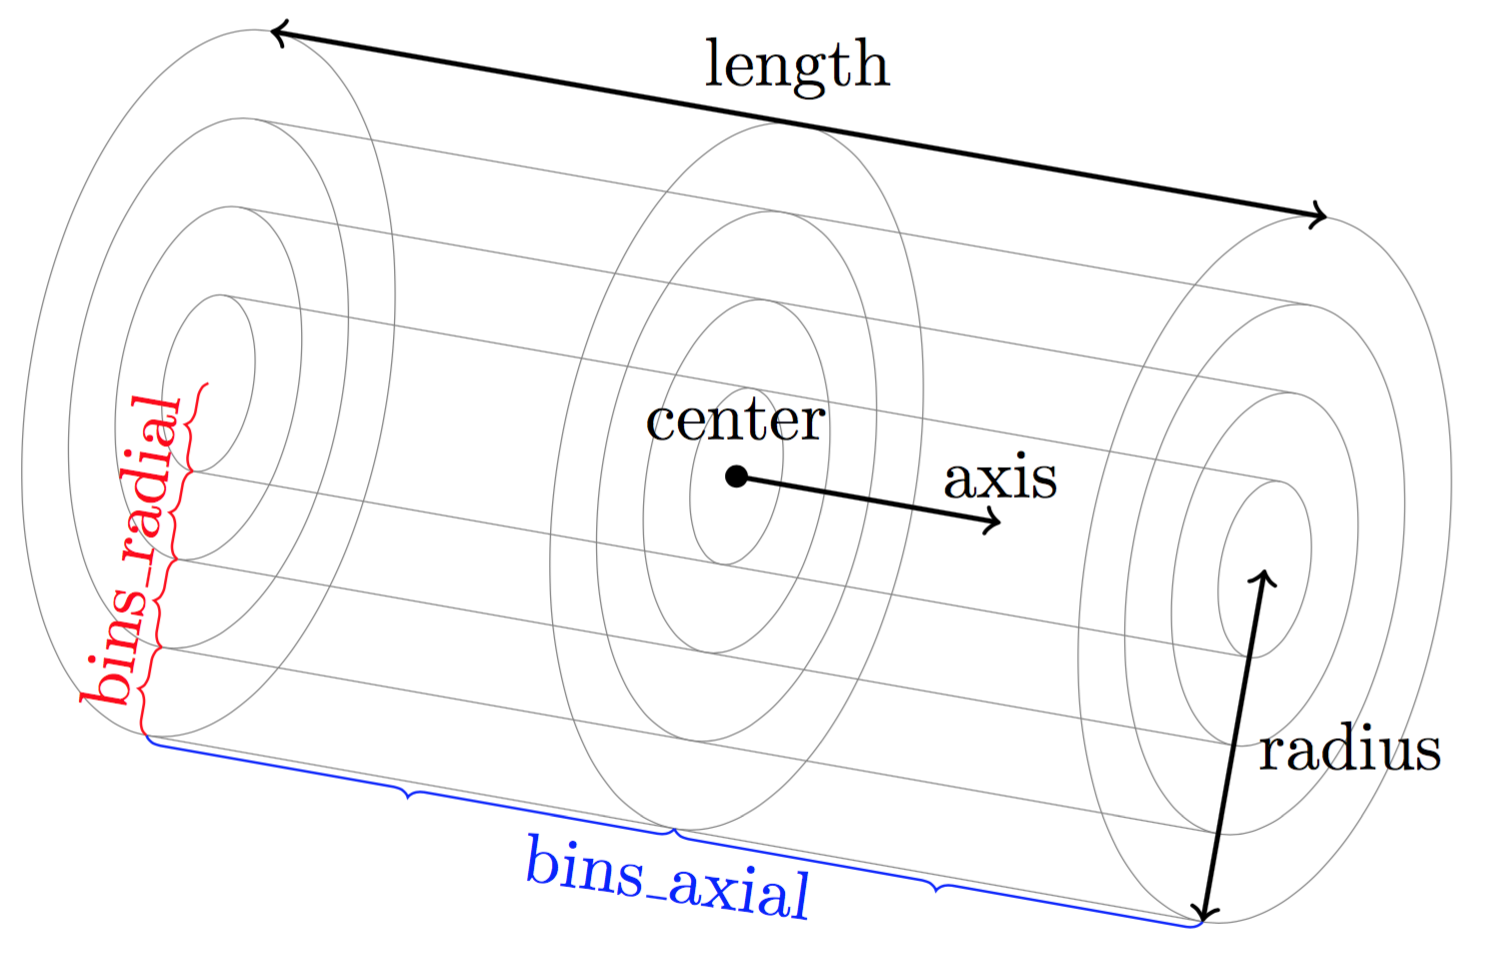 Geometry for the cylindrical binning